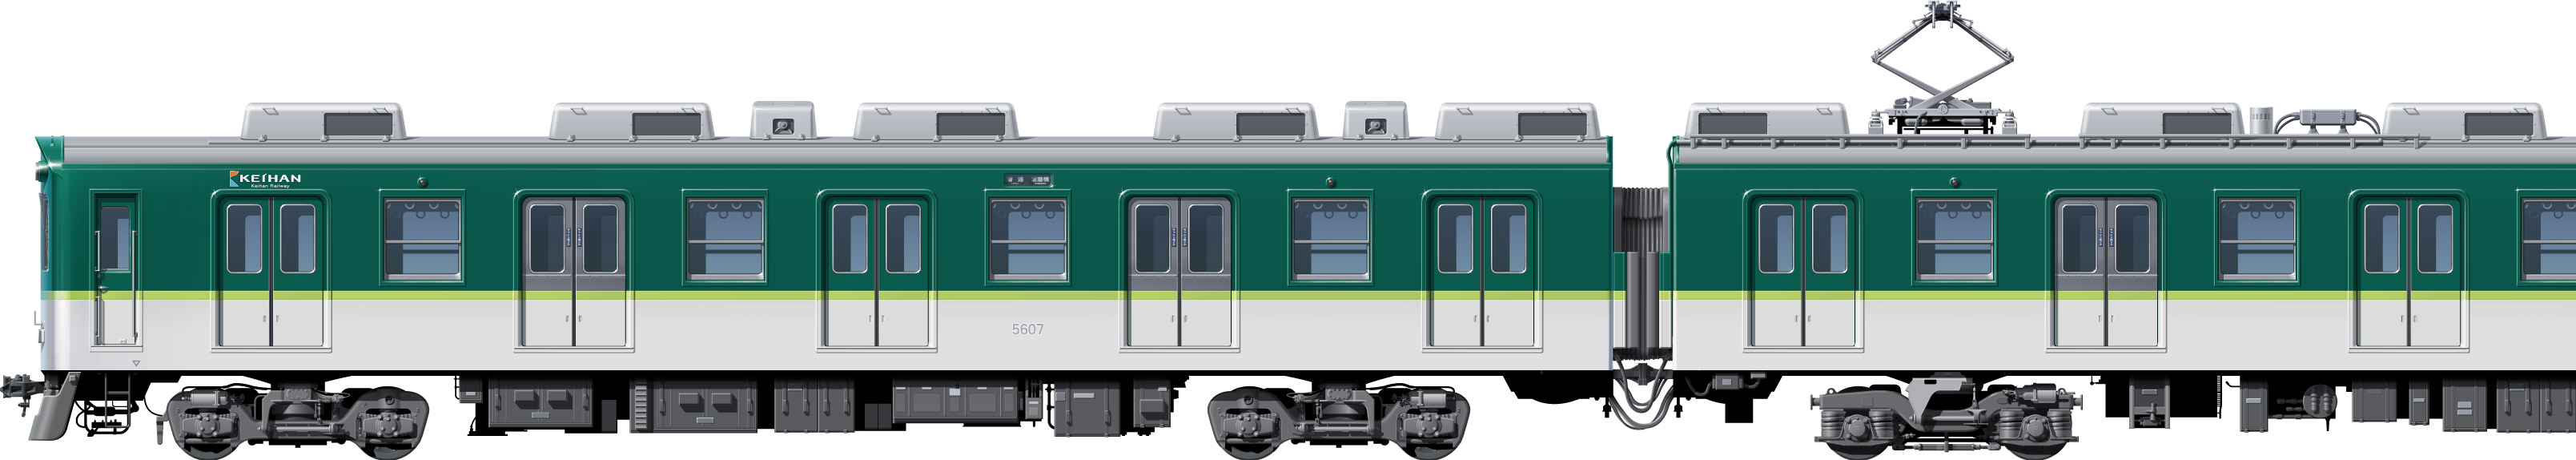 5000n@ʃCXg@ʃCXg@tgr[CXg@TChr[CXg@CXg@dS@5ԁ@5hA  keihan Railway illustration  front view@sideview front view 